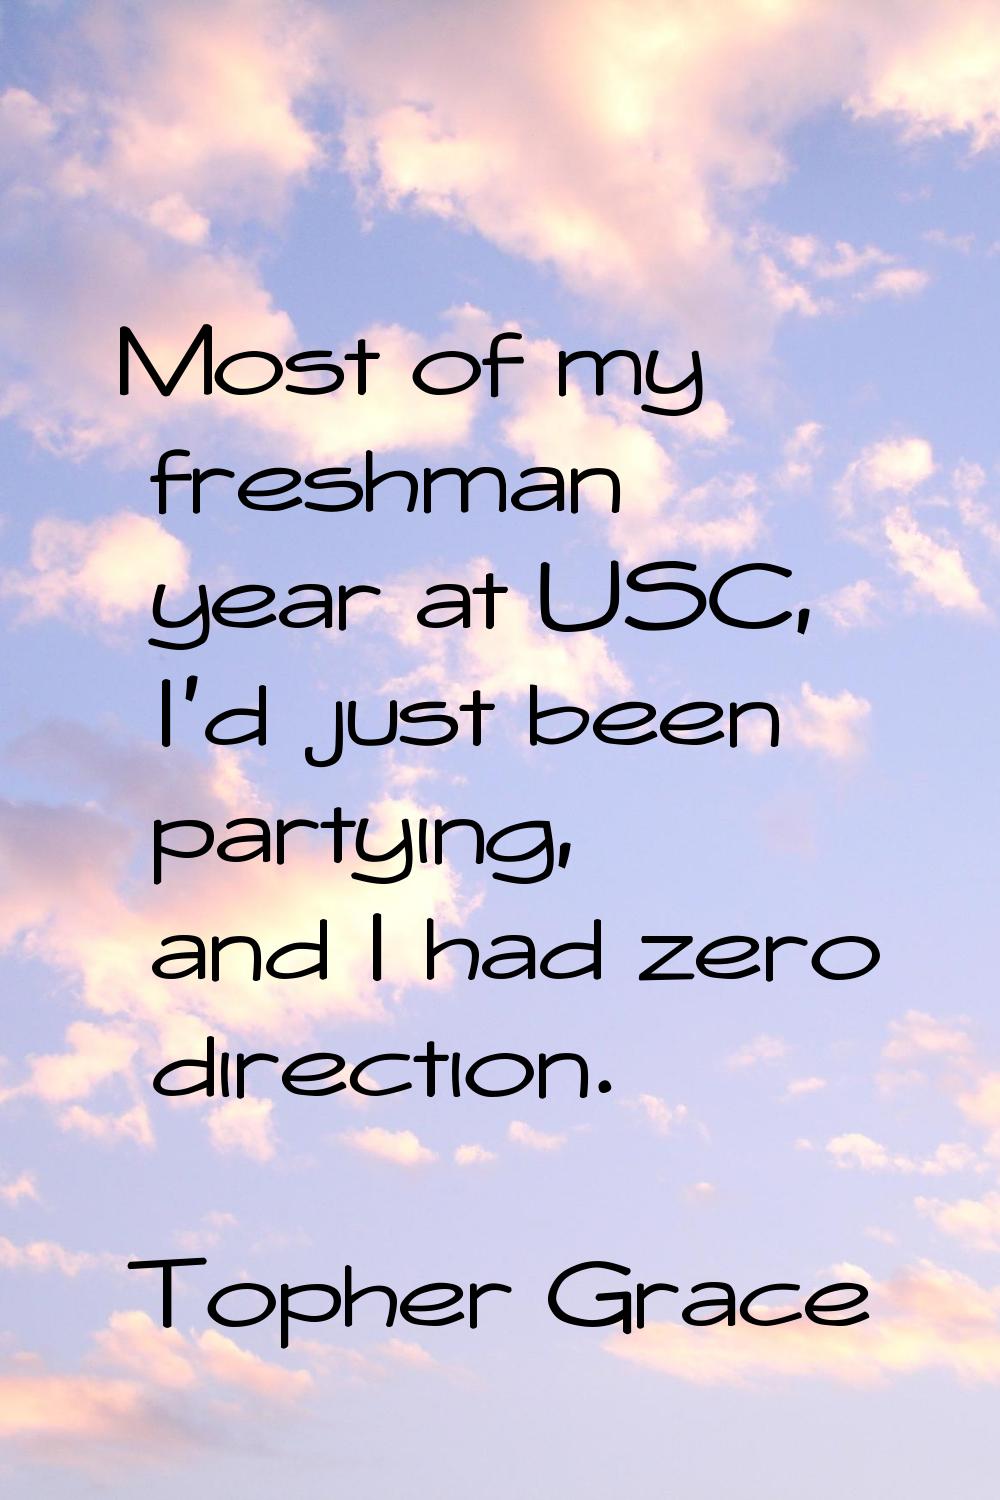 Most of my freshman year at USC, I'd just been partying, and I had zero direction.